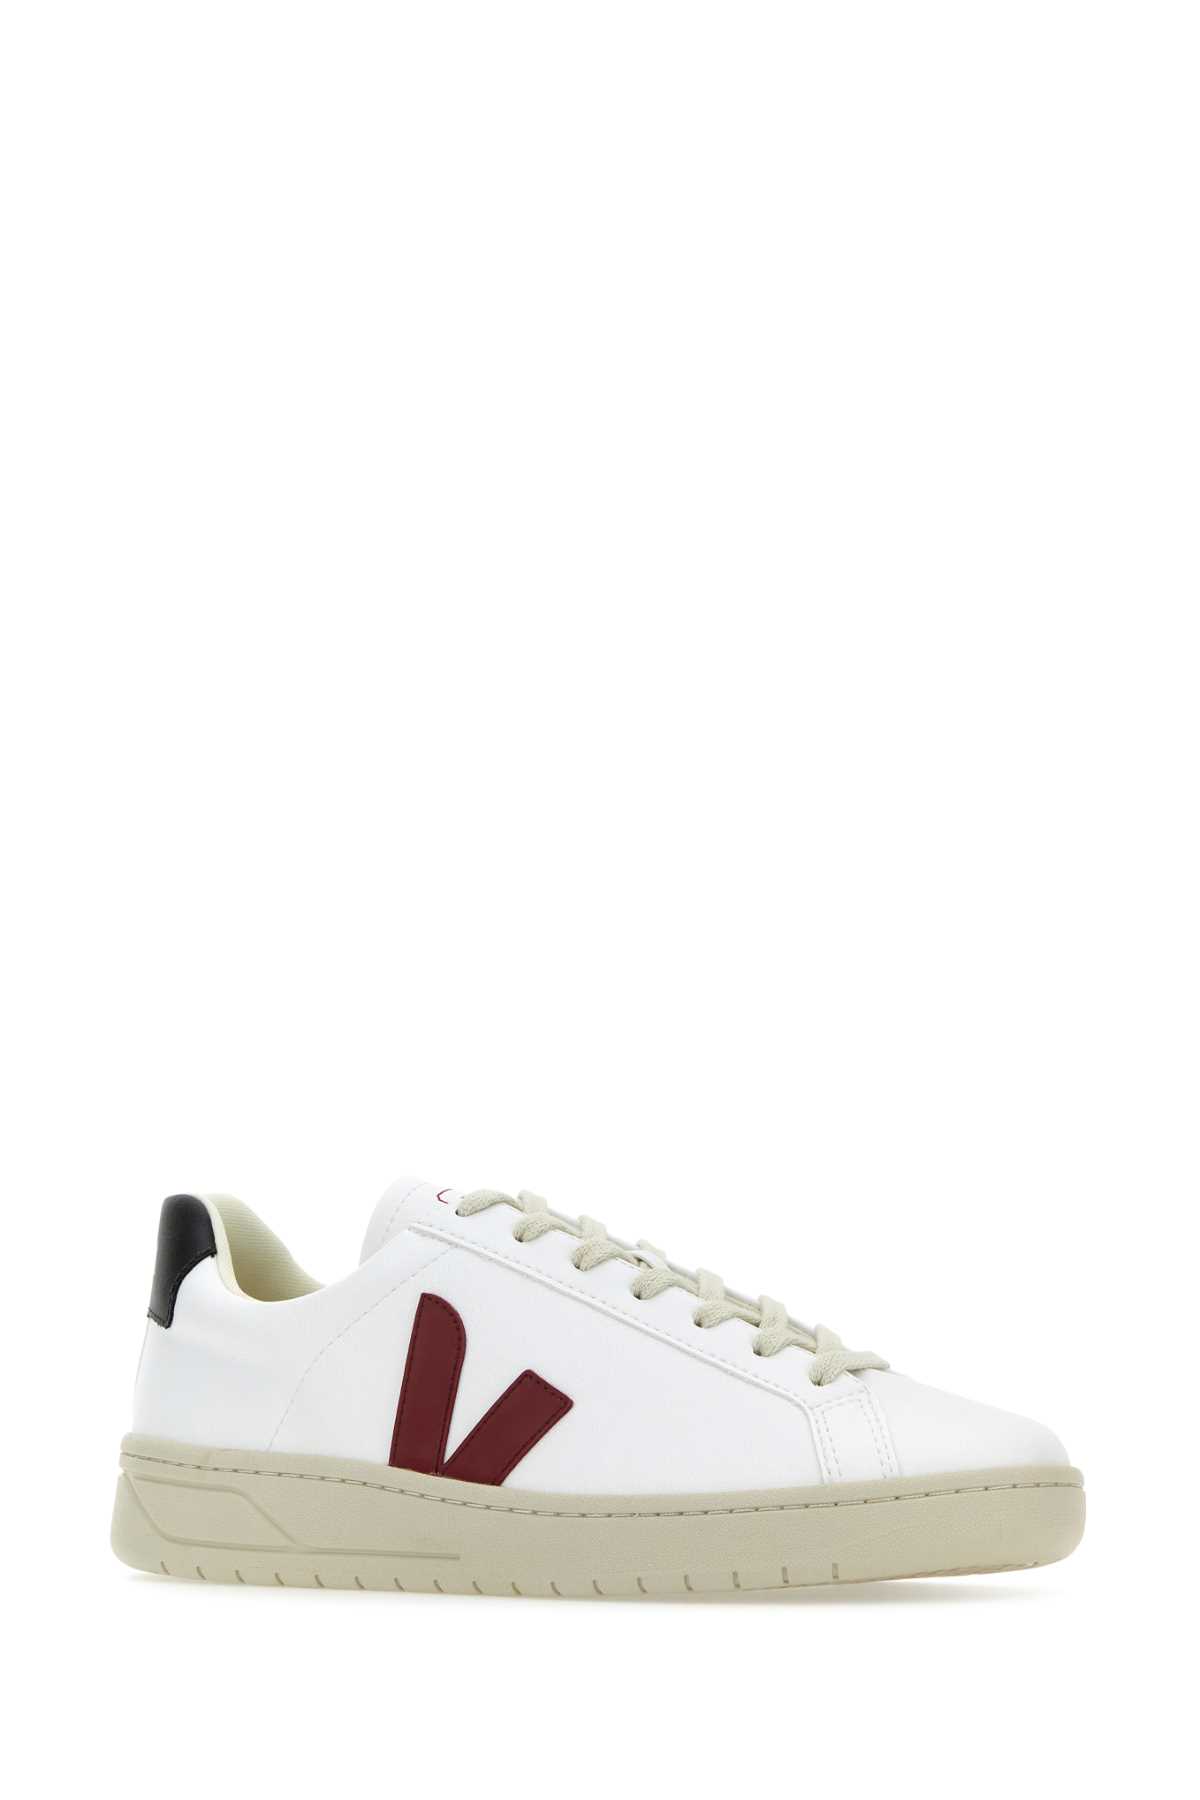 Veja White Synthetic Leather Urca Sneakers In Whitemarsalablack